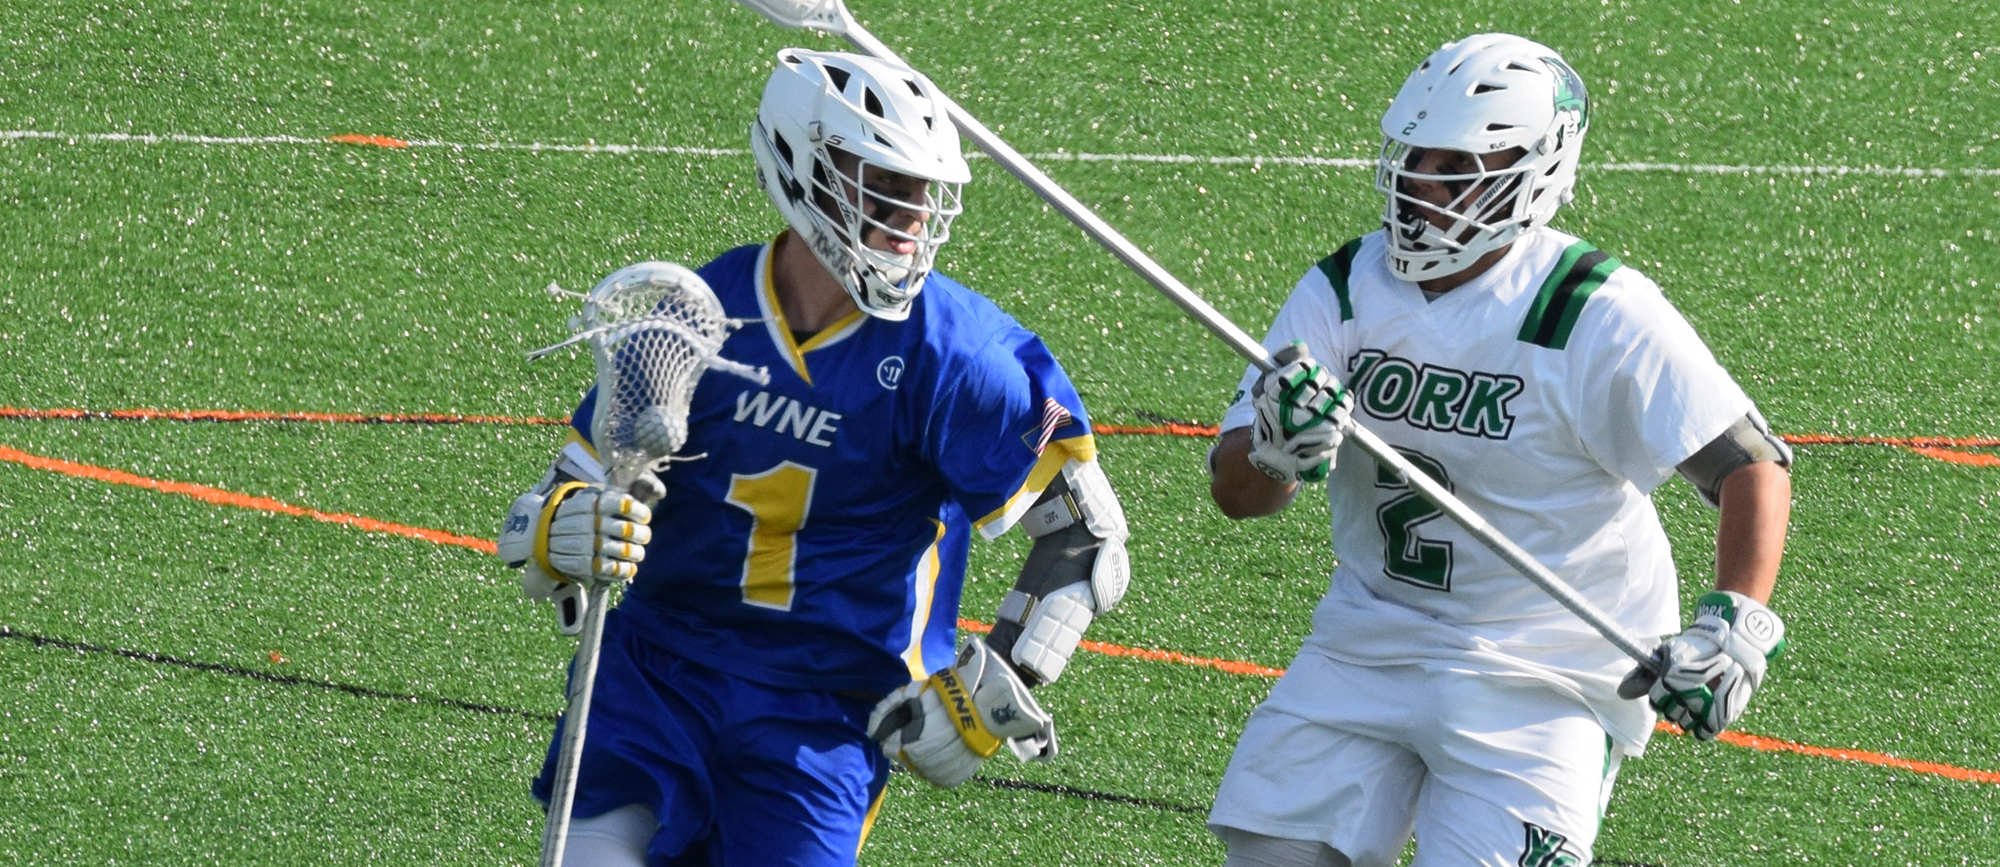 Senior Mikey Wood scored two goals in Western New England's 15-7 loss to York College in the second round of the NCAA Tournament on Wednesday.